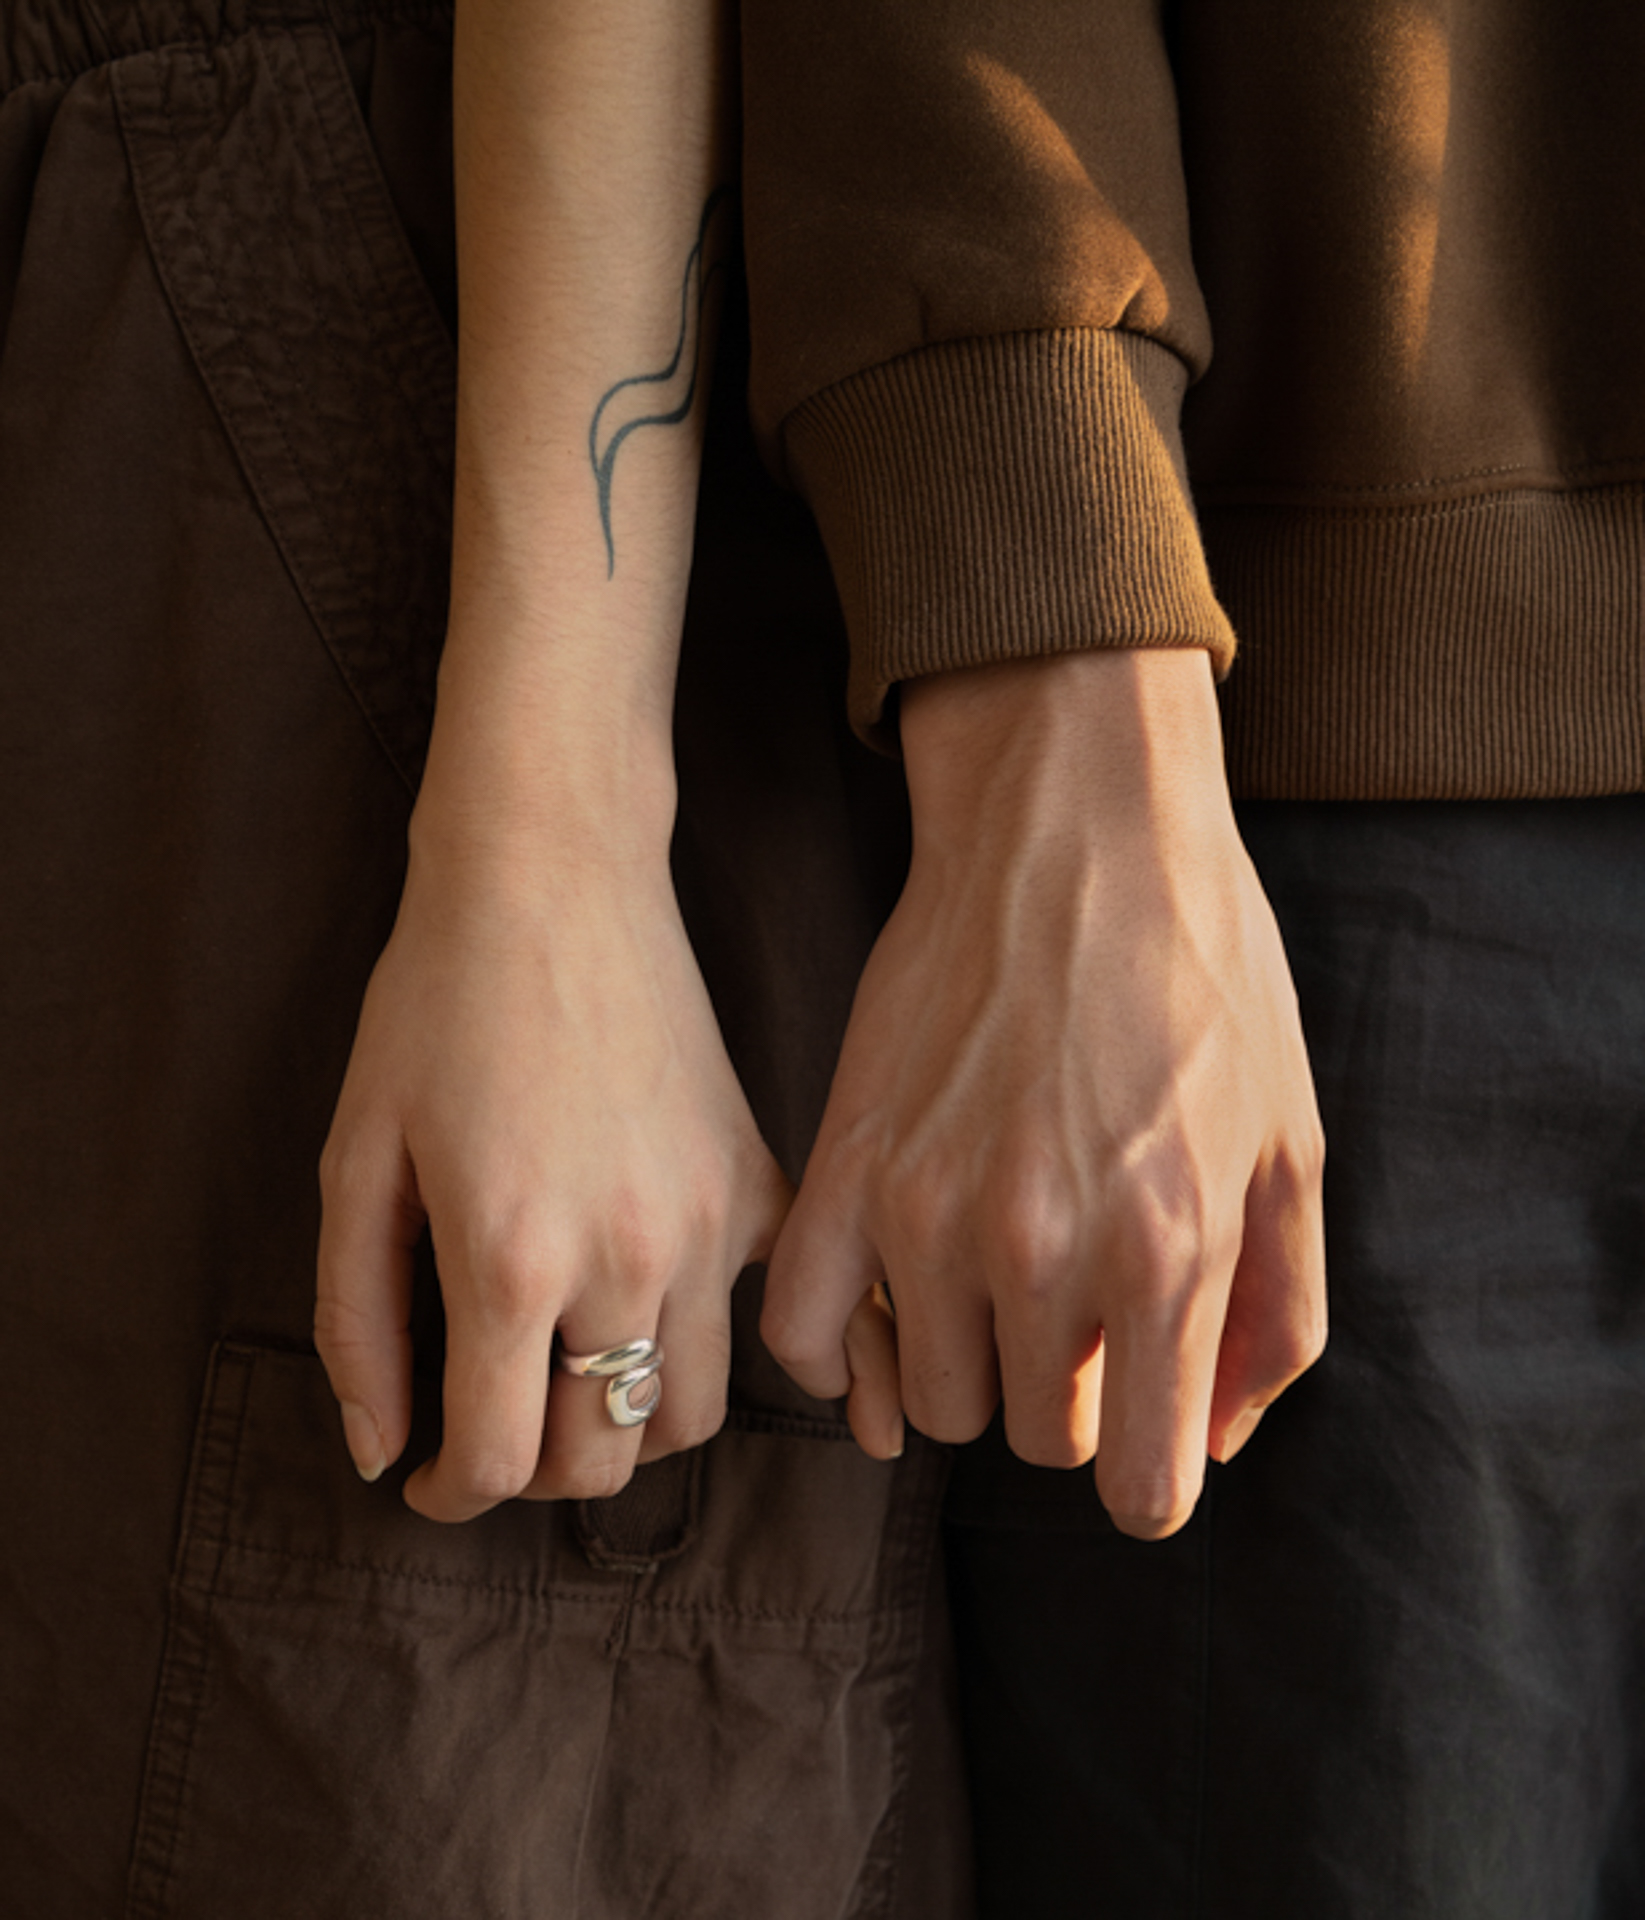 This photograph is a close up detail shot of two people's hands linked by their pinkies. The hand to the left is wearing a silver ring on their middle finger. The hands are at waist level and the overall colour scheme consists of warm browns and greys.